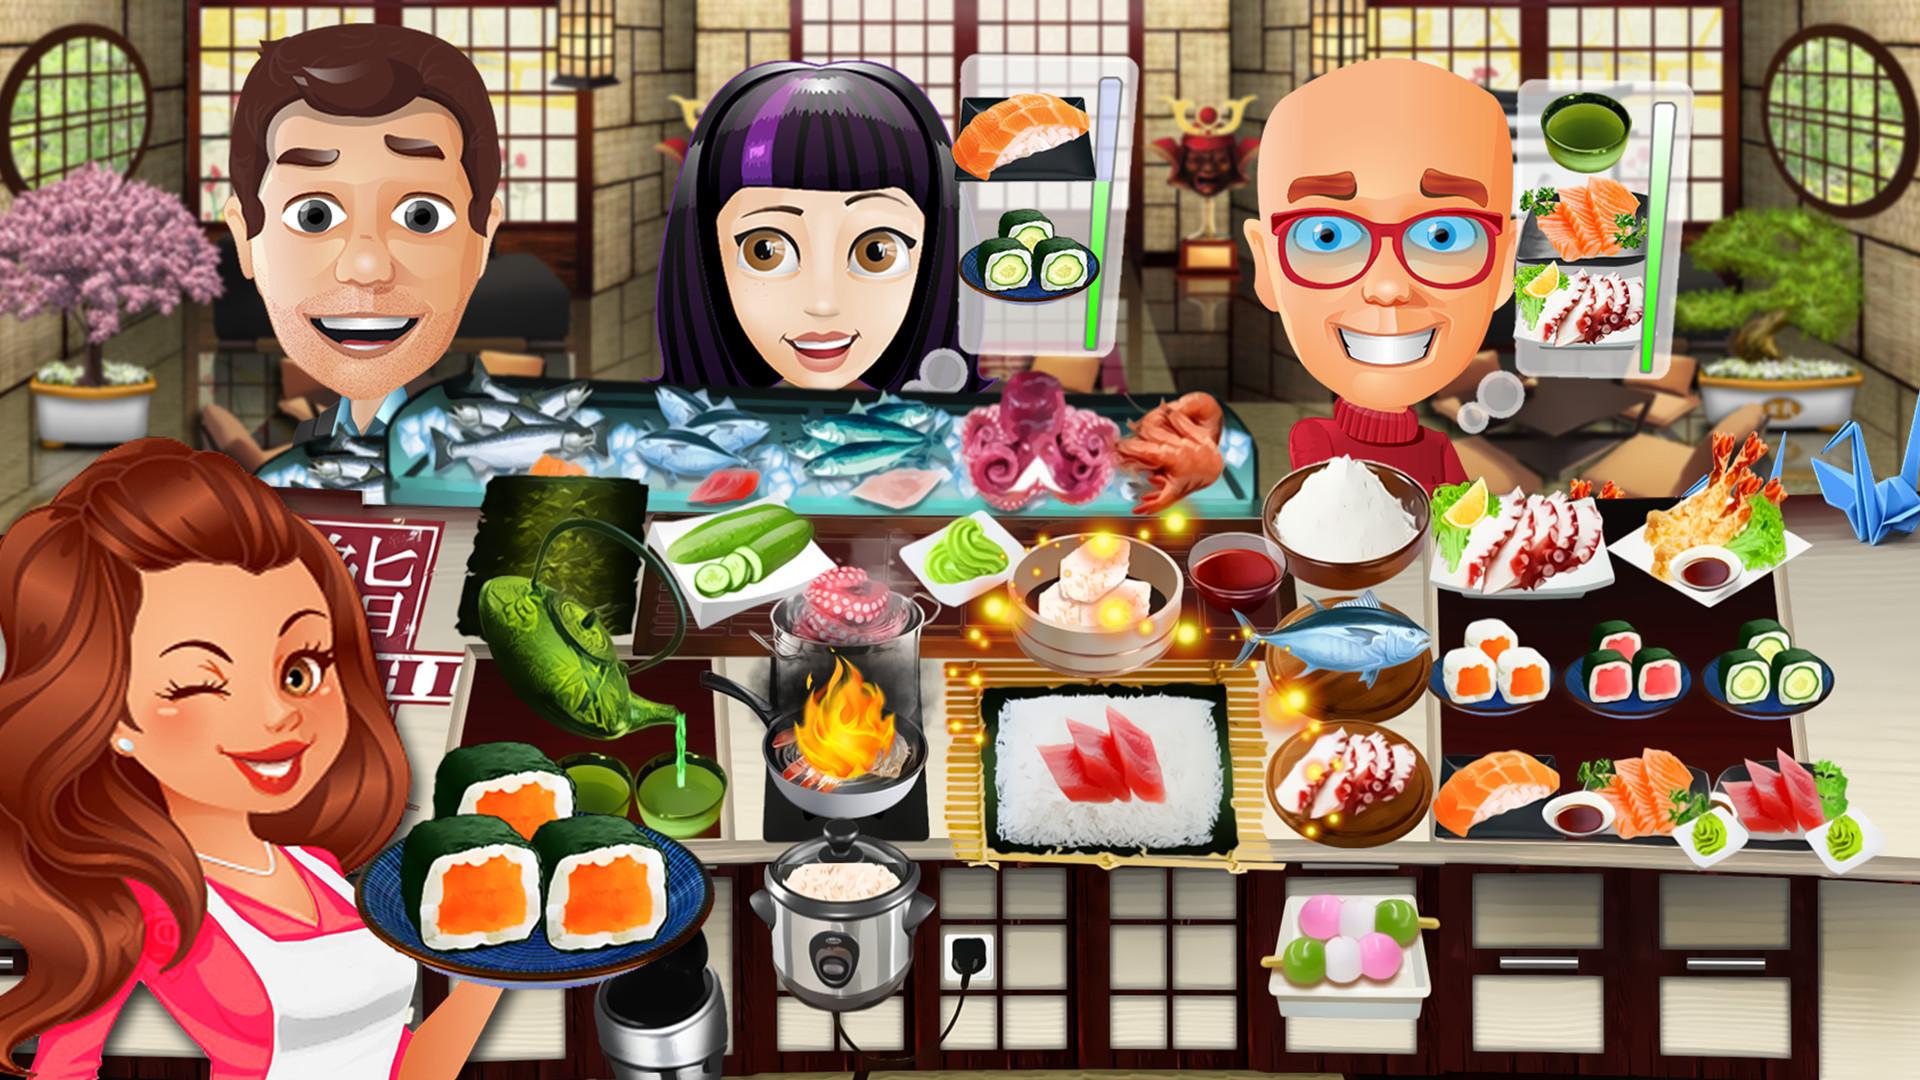 Screenshot №1 from game The Cooking Game